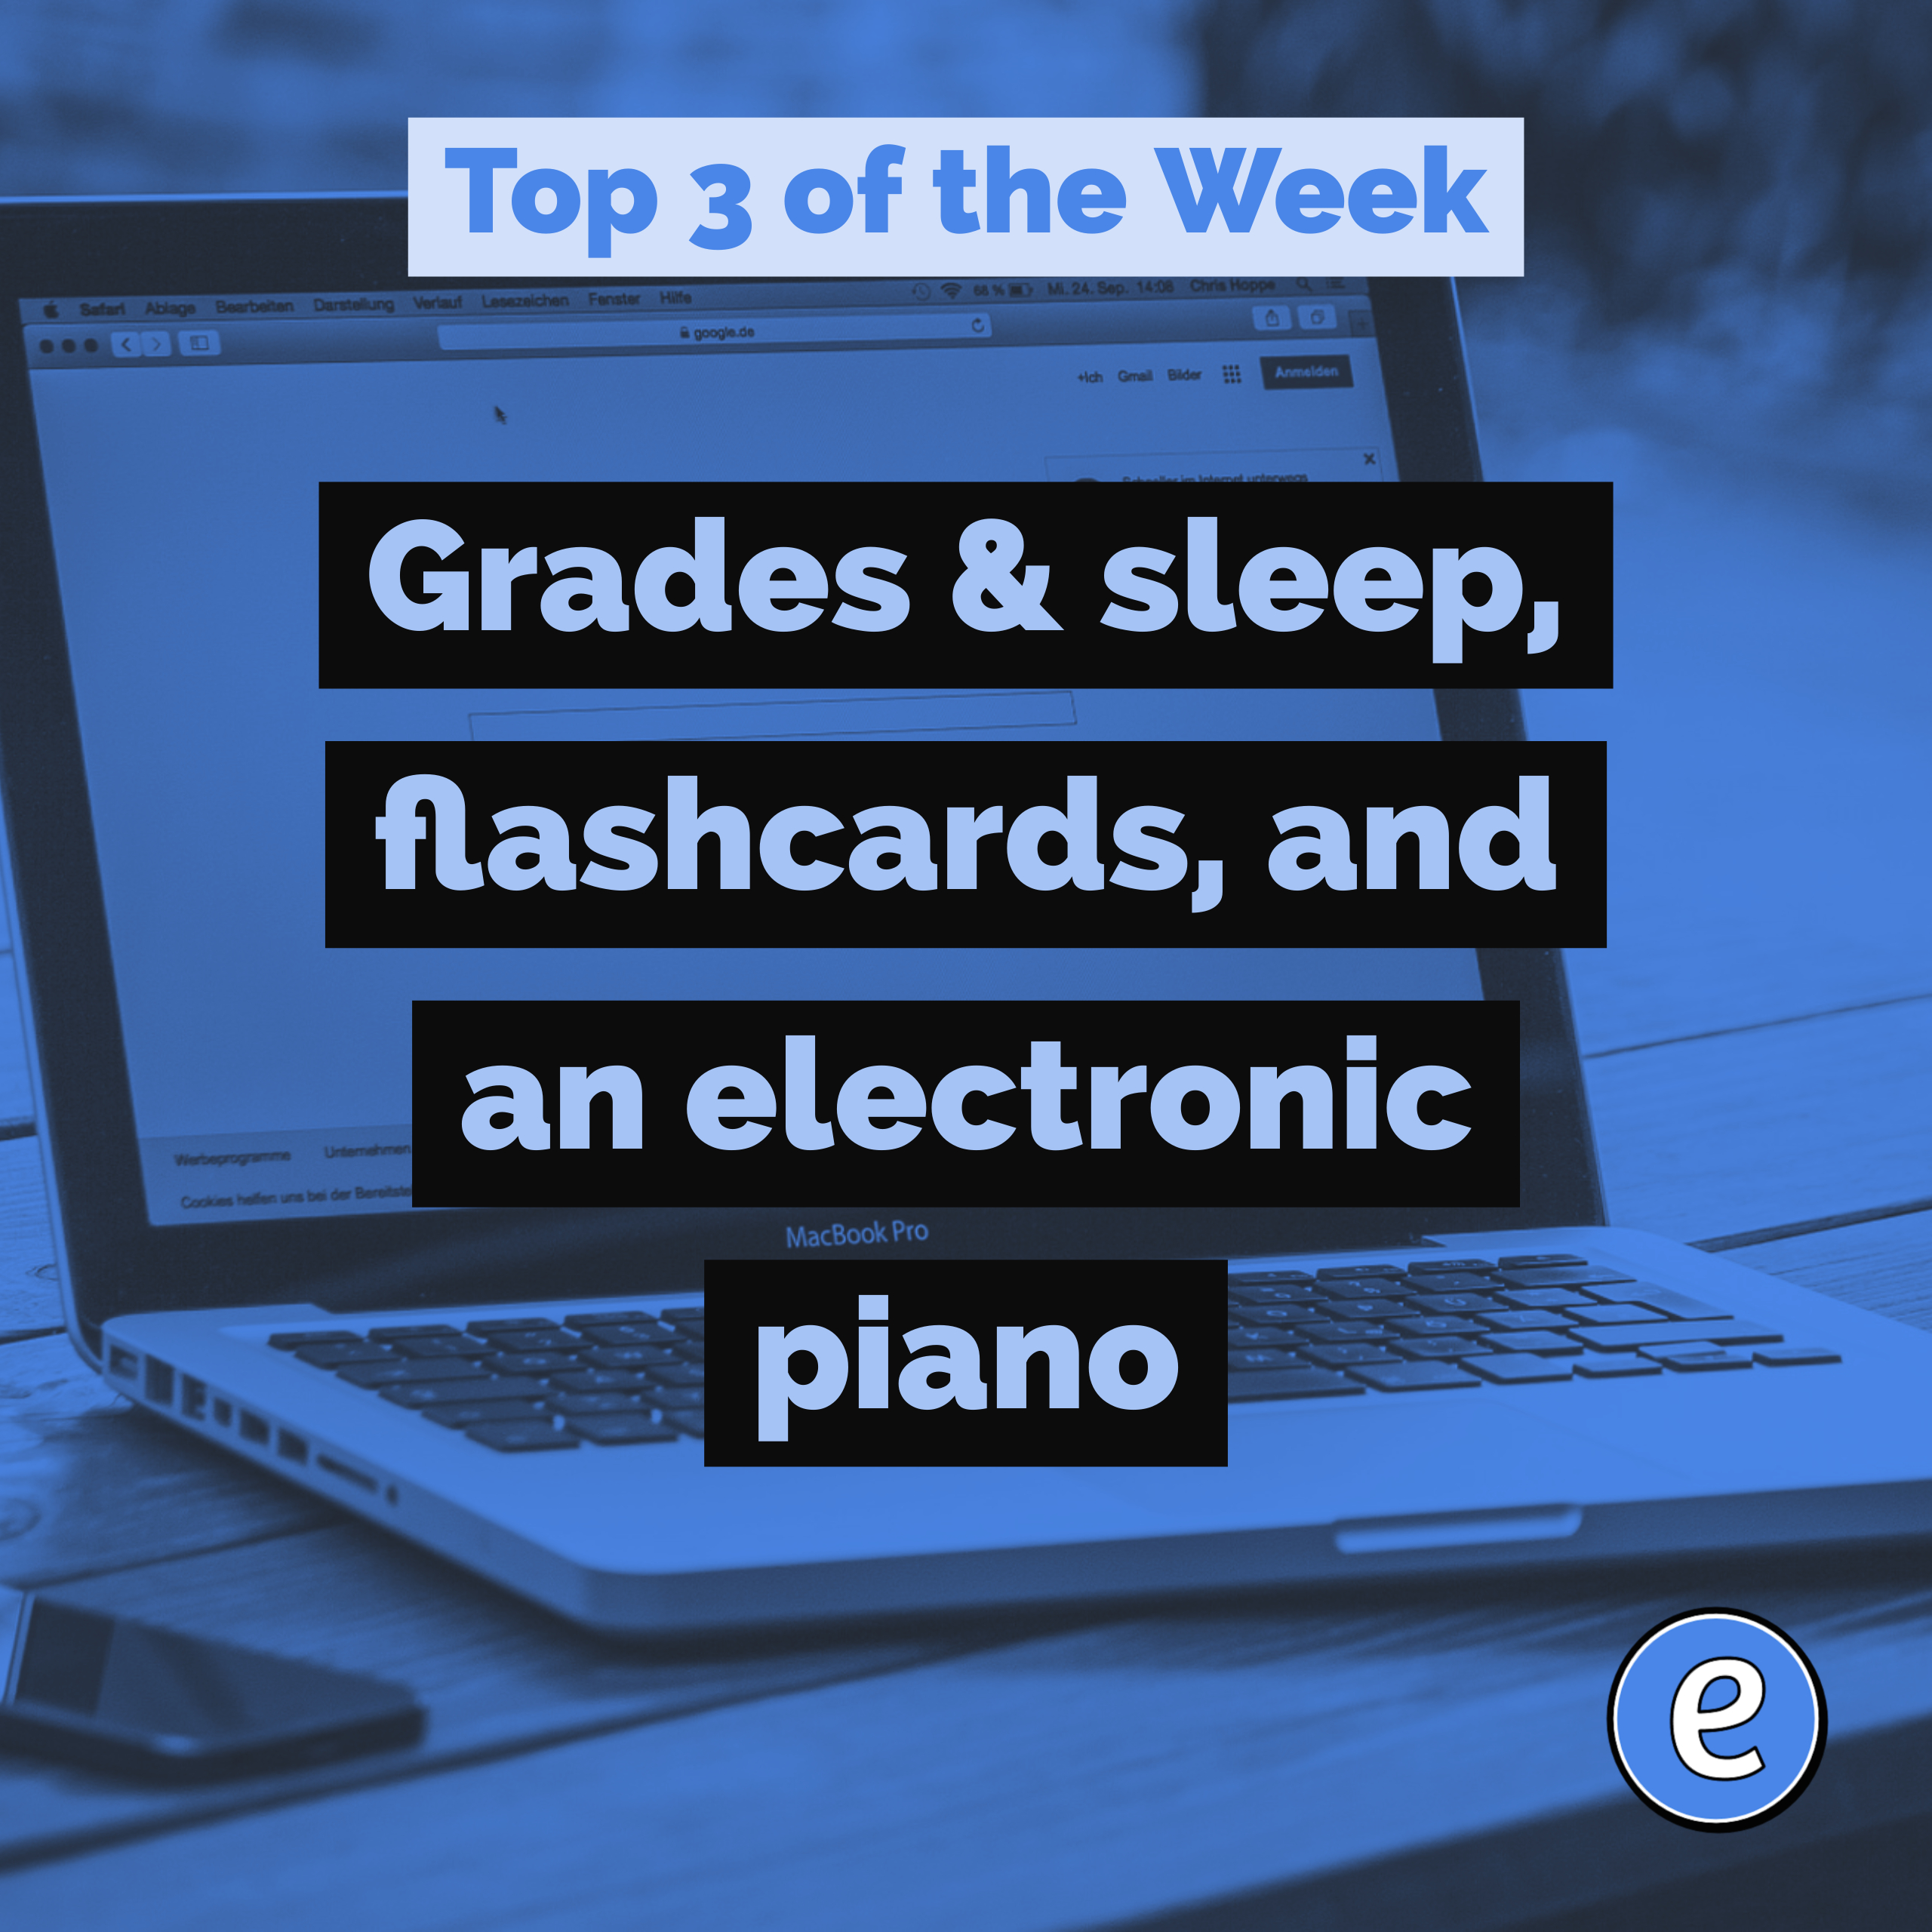 Grades & sleep, flashcards, and an electronic piano – Top 3 for the Week